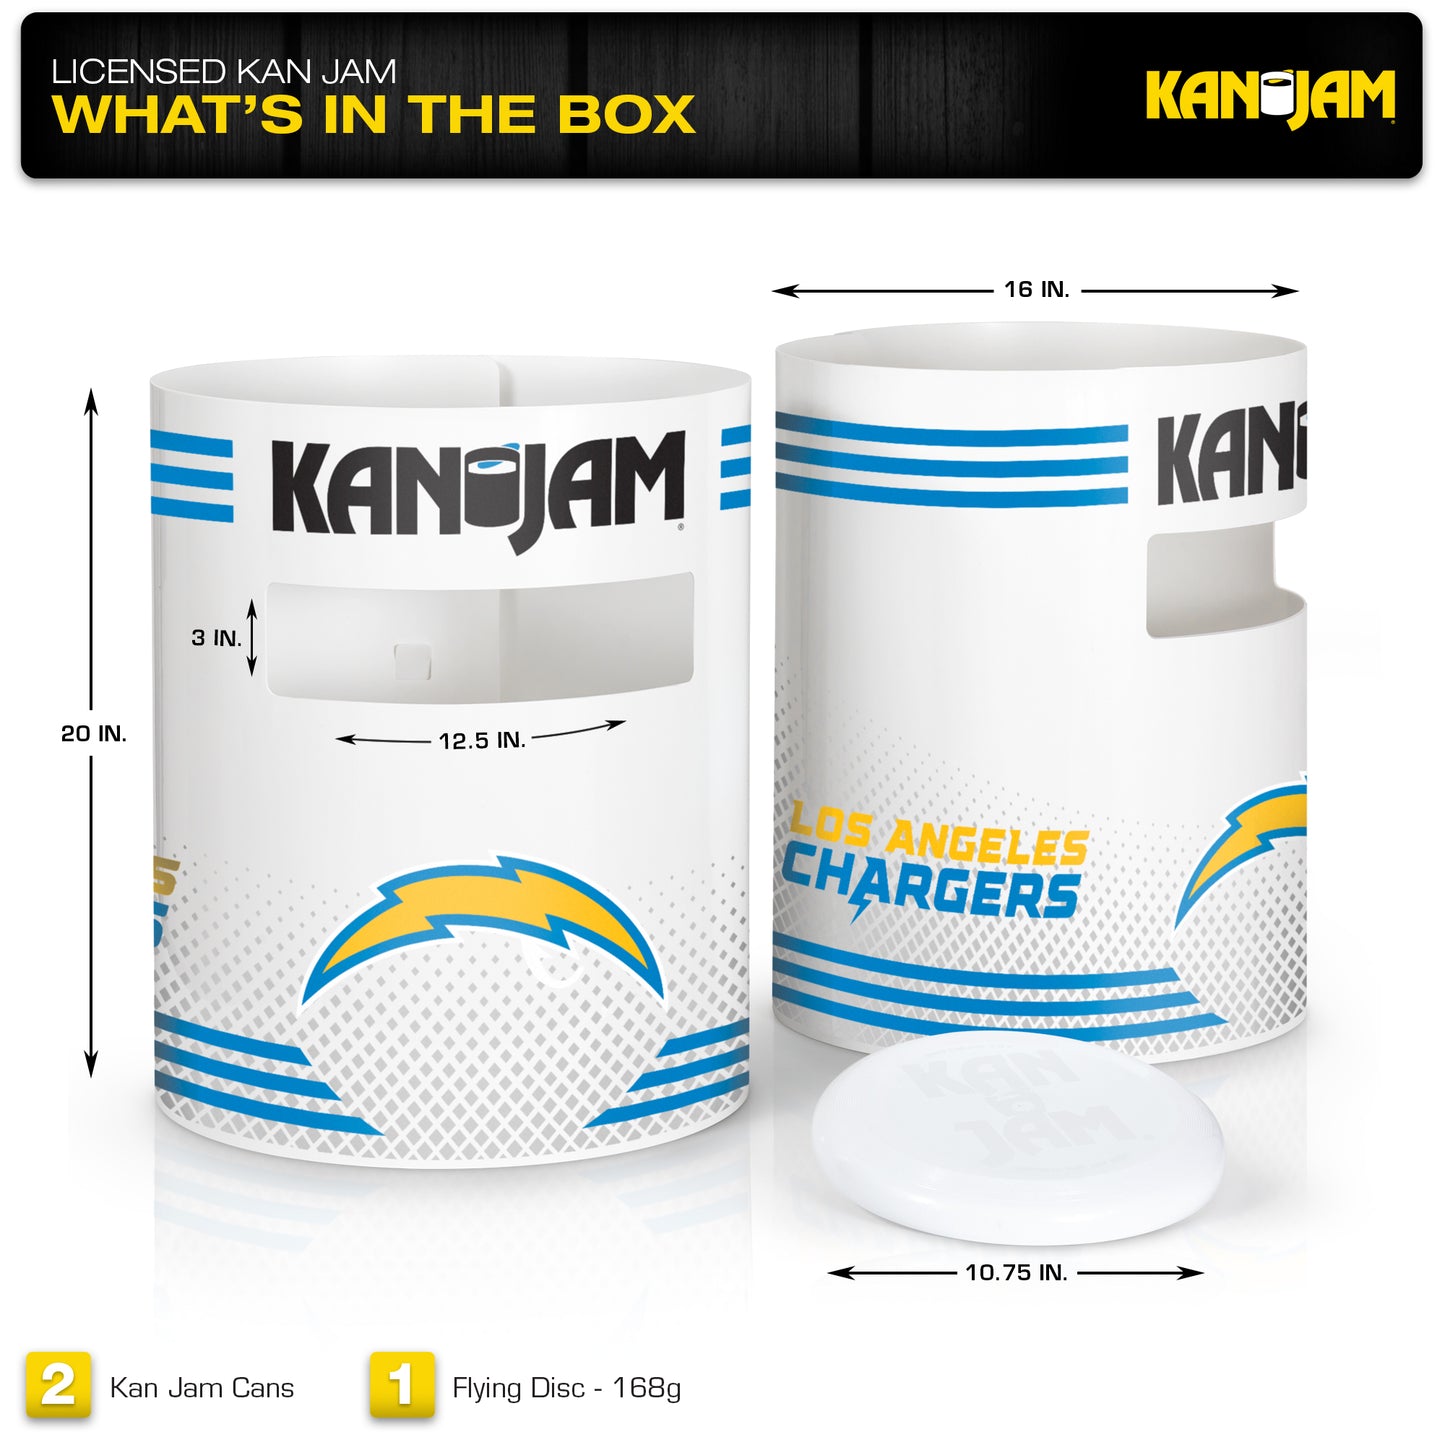 Los Angeles Chargers Kan Jam Set